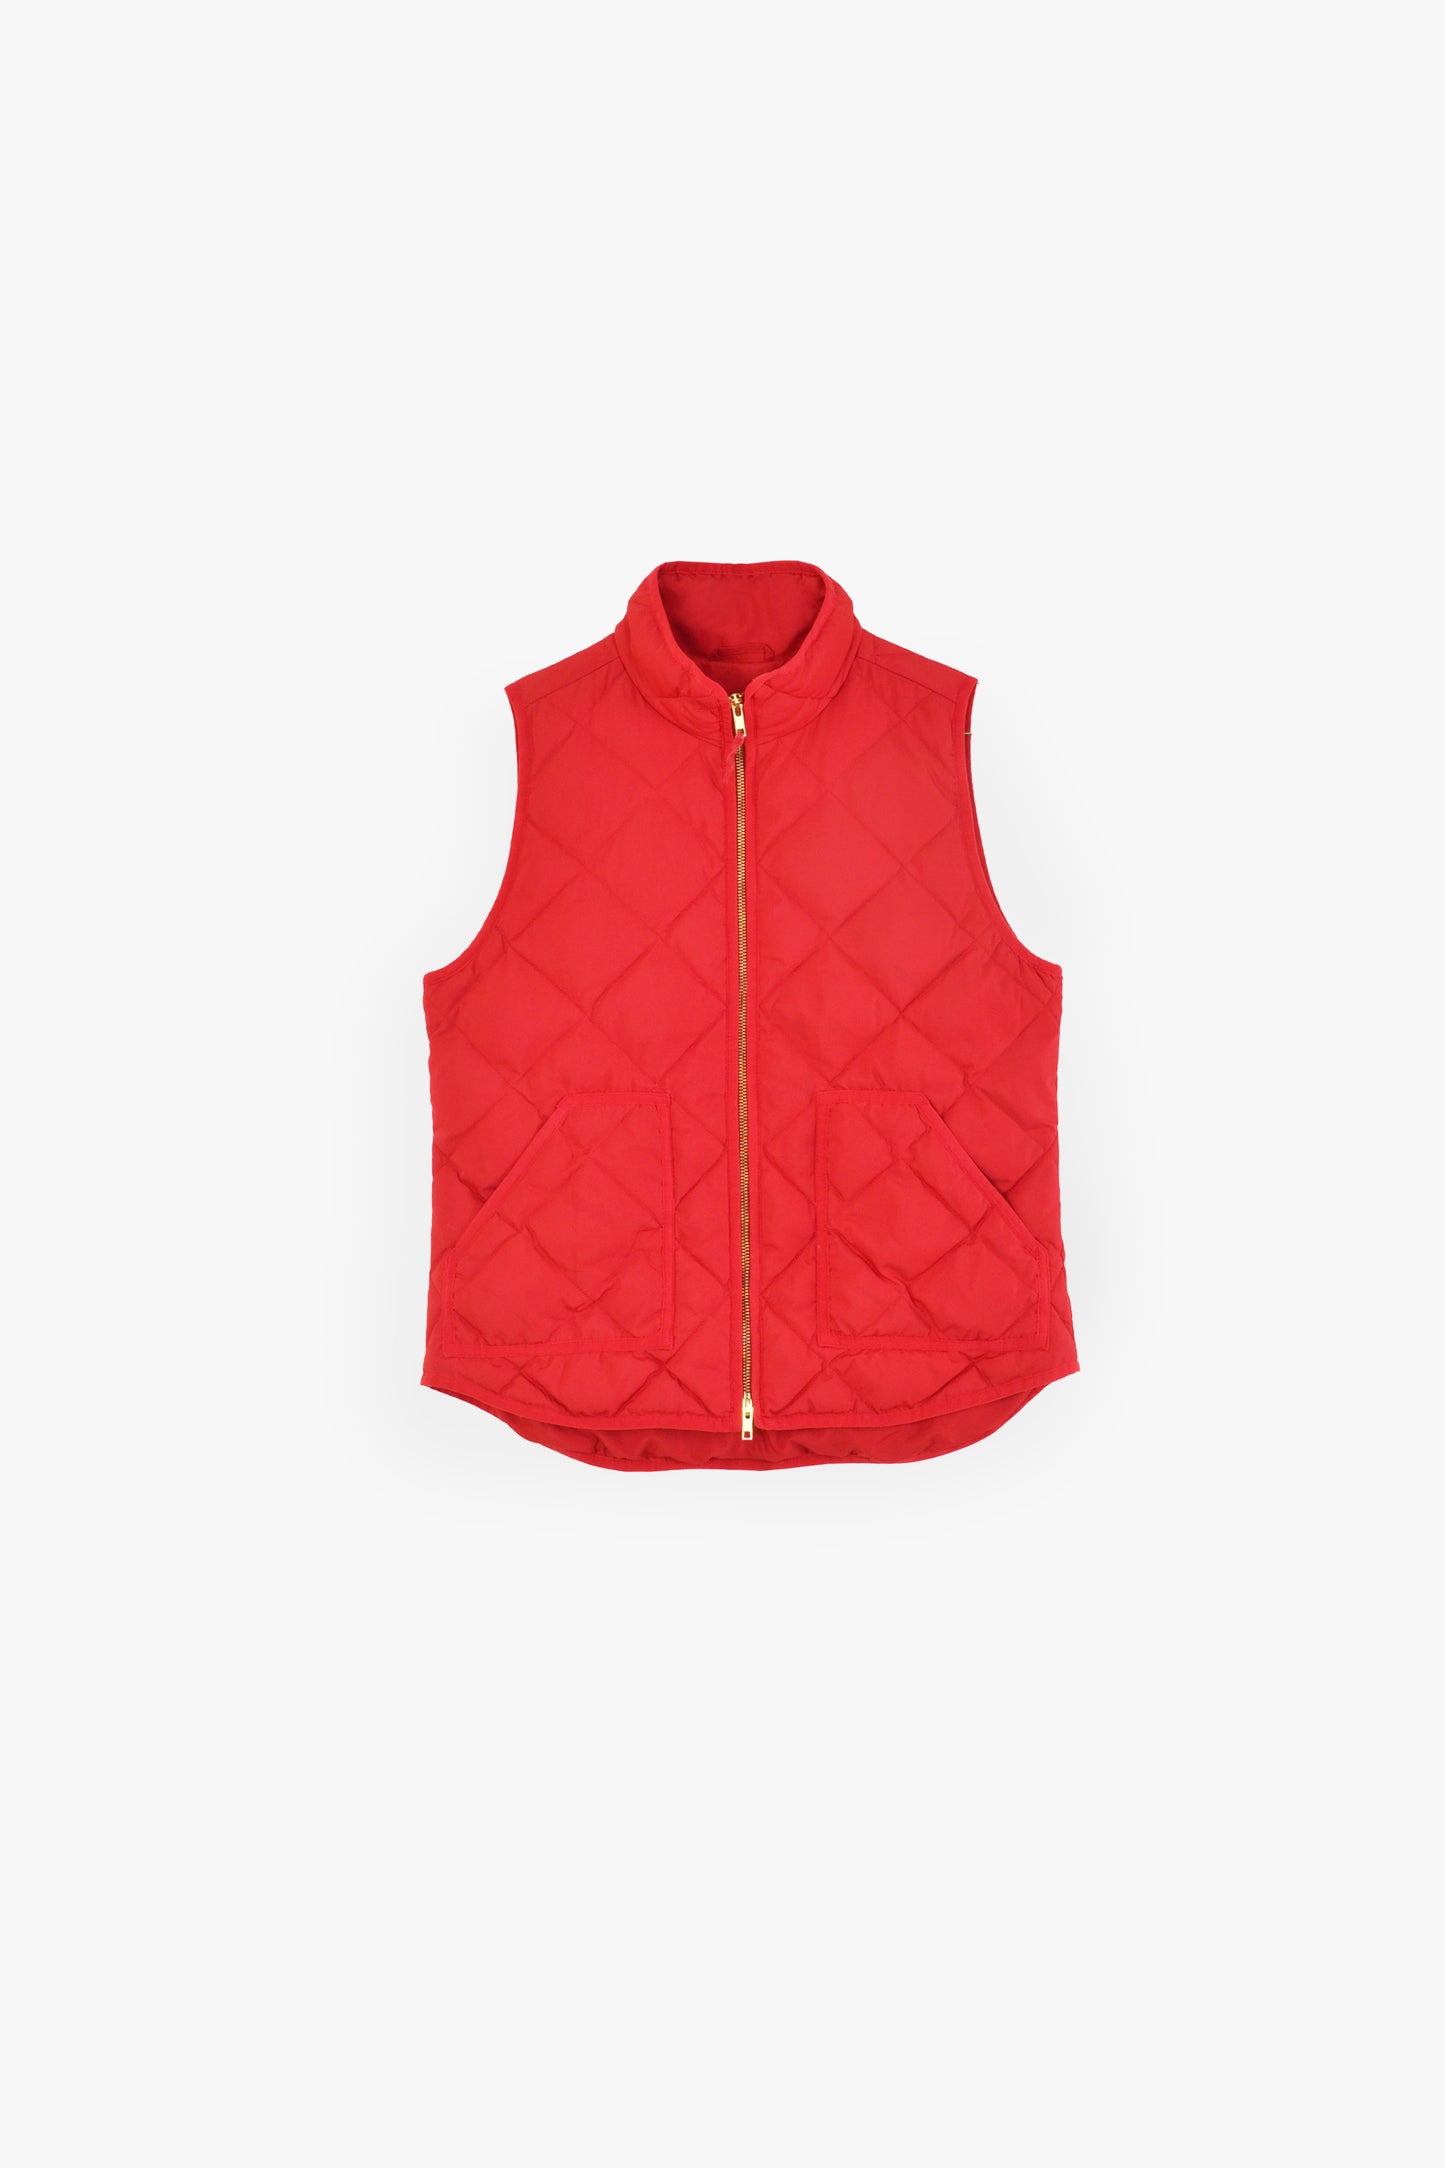 Daisy Vest in Red